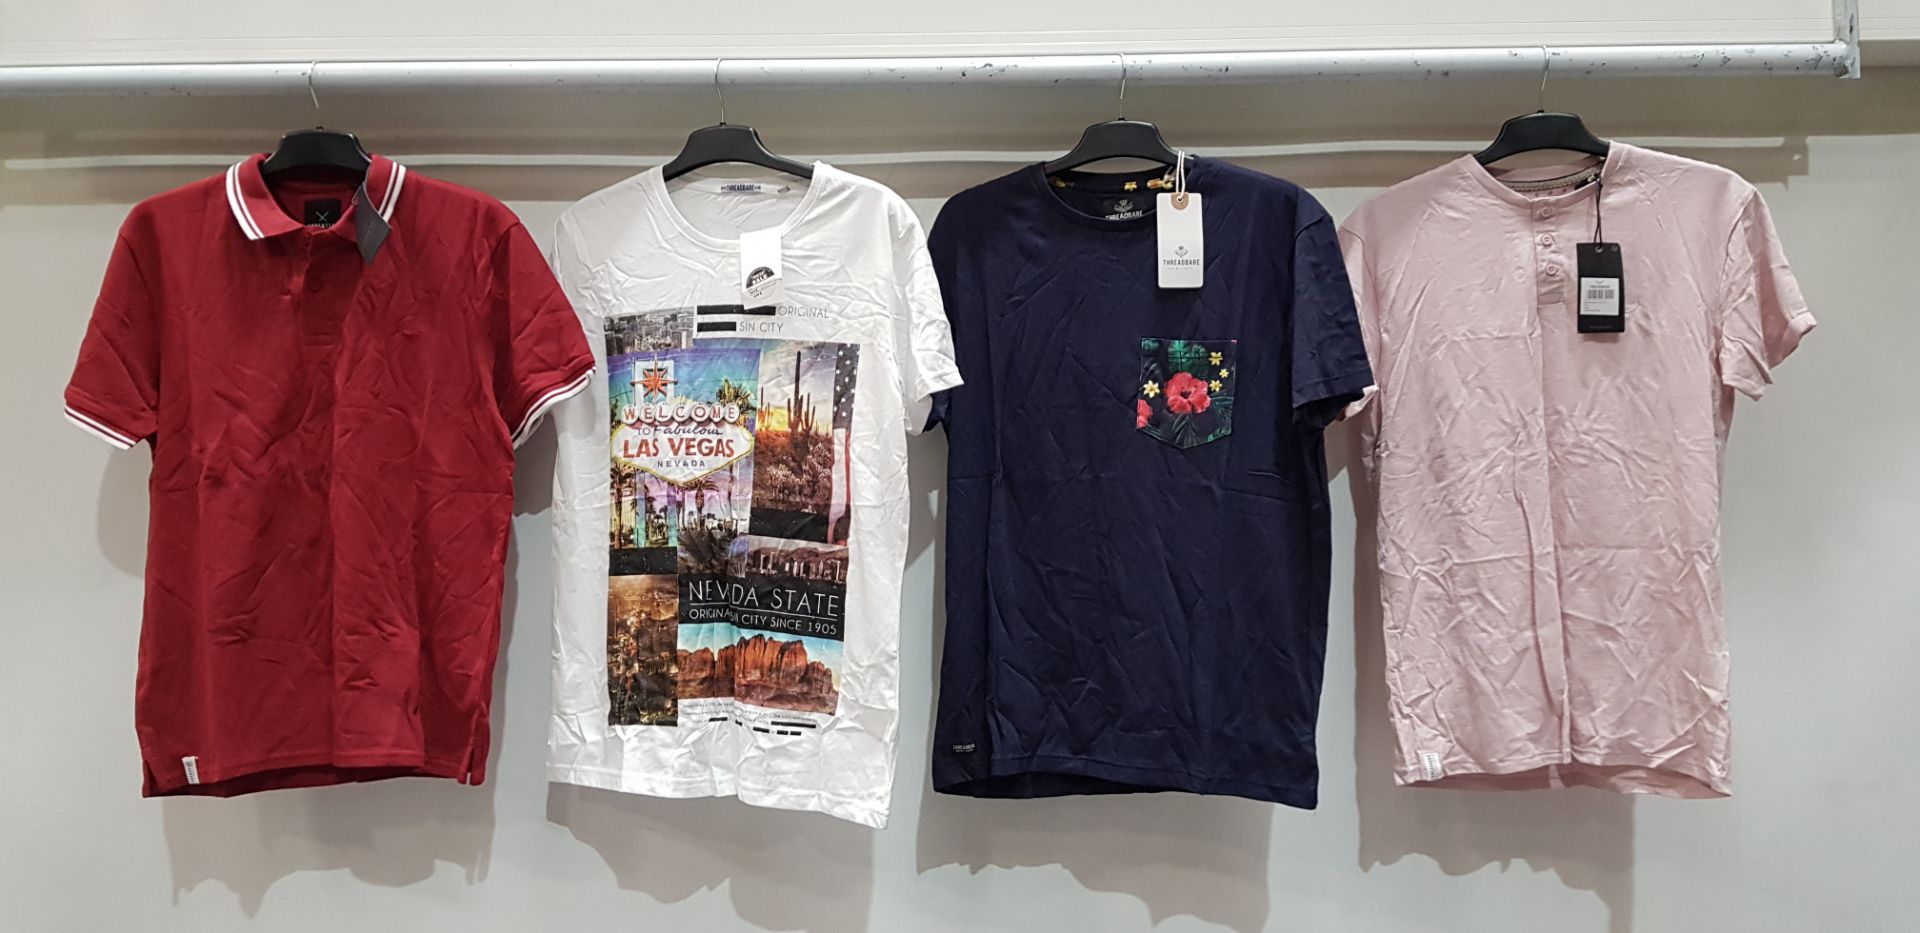 12 X BRAND NEW THREADBARE MIXED T SHIRTS IN DIFFERENT STYLES AND SIZES TOTAL RRP £227.88